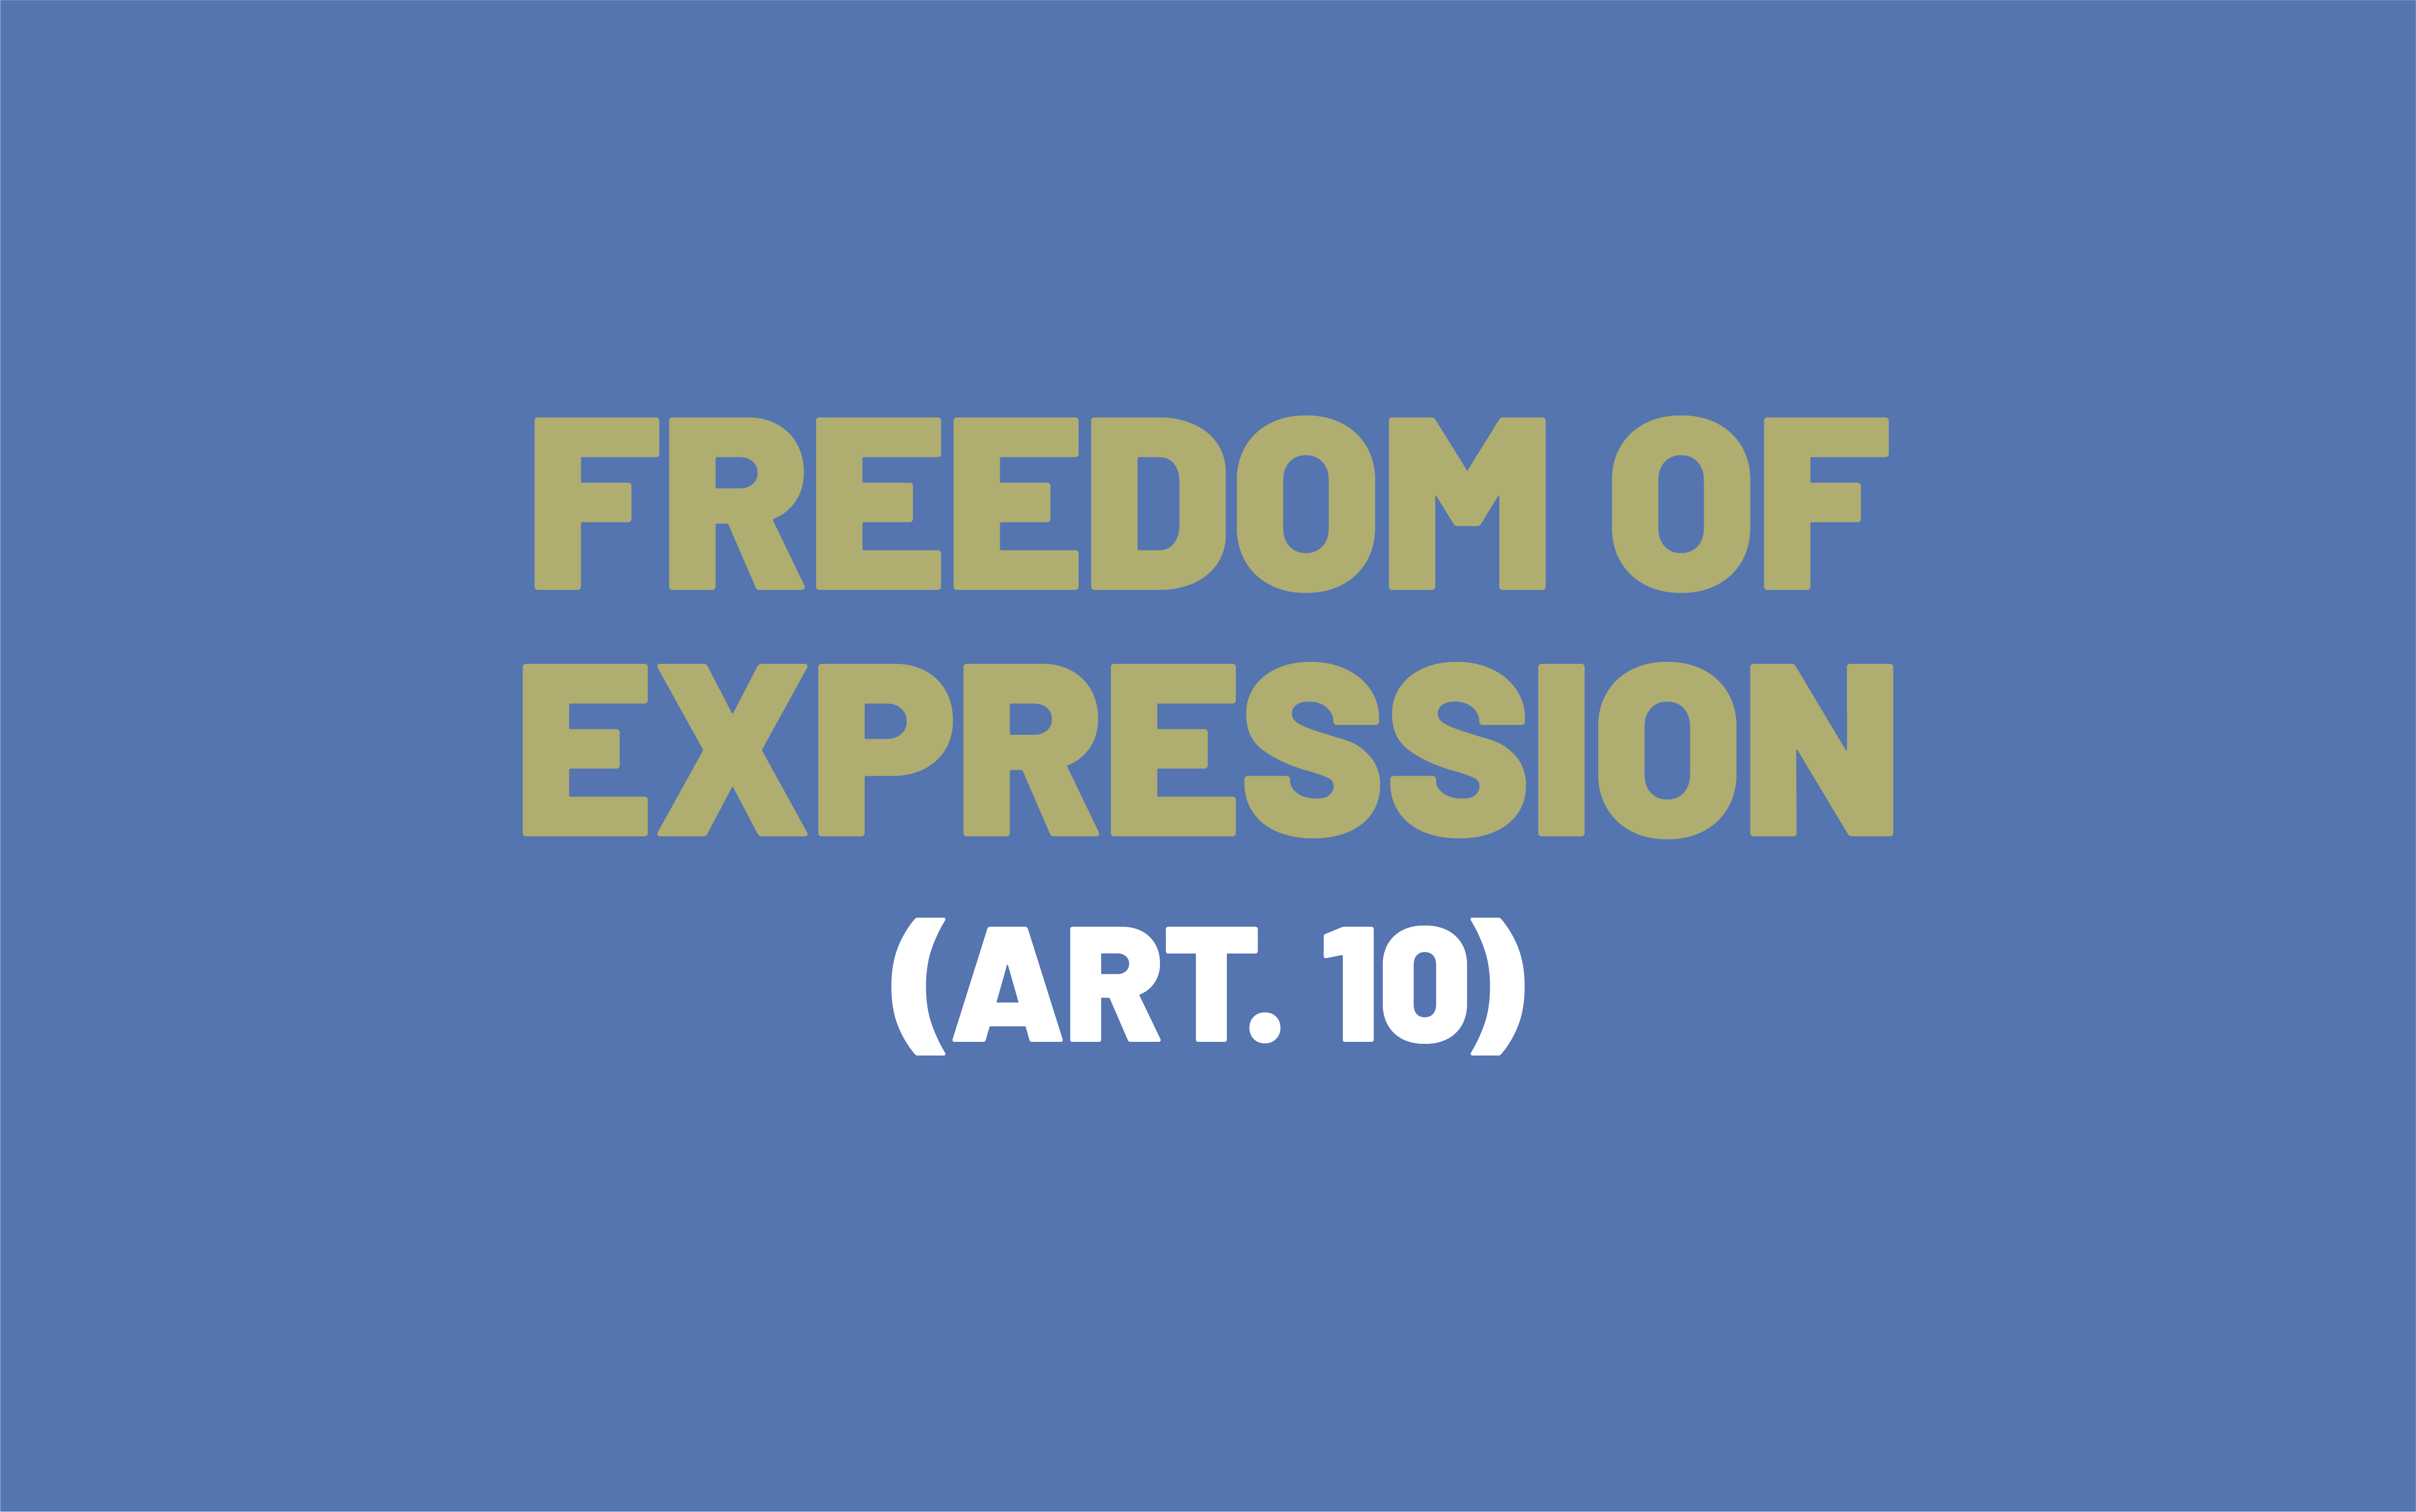 The image is taken from the text of Article 10 of the European Convention on Human Rights, which reads: "Freedom of expression".